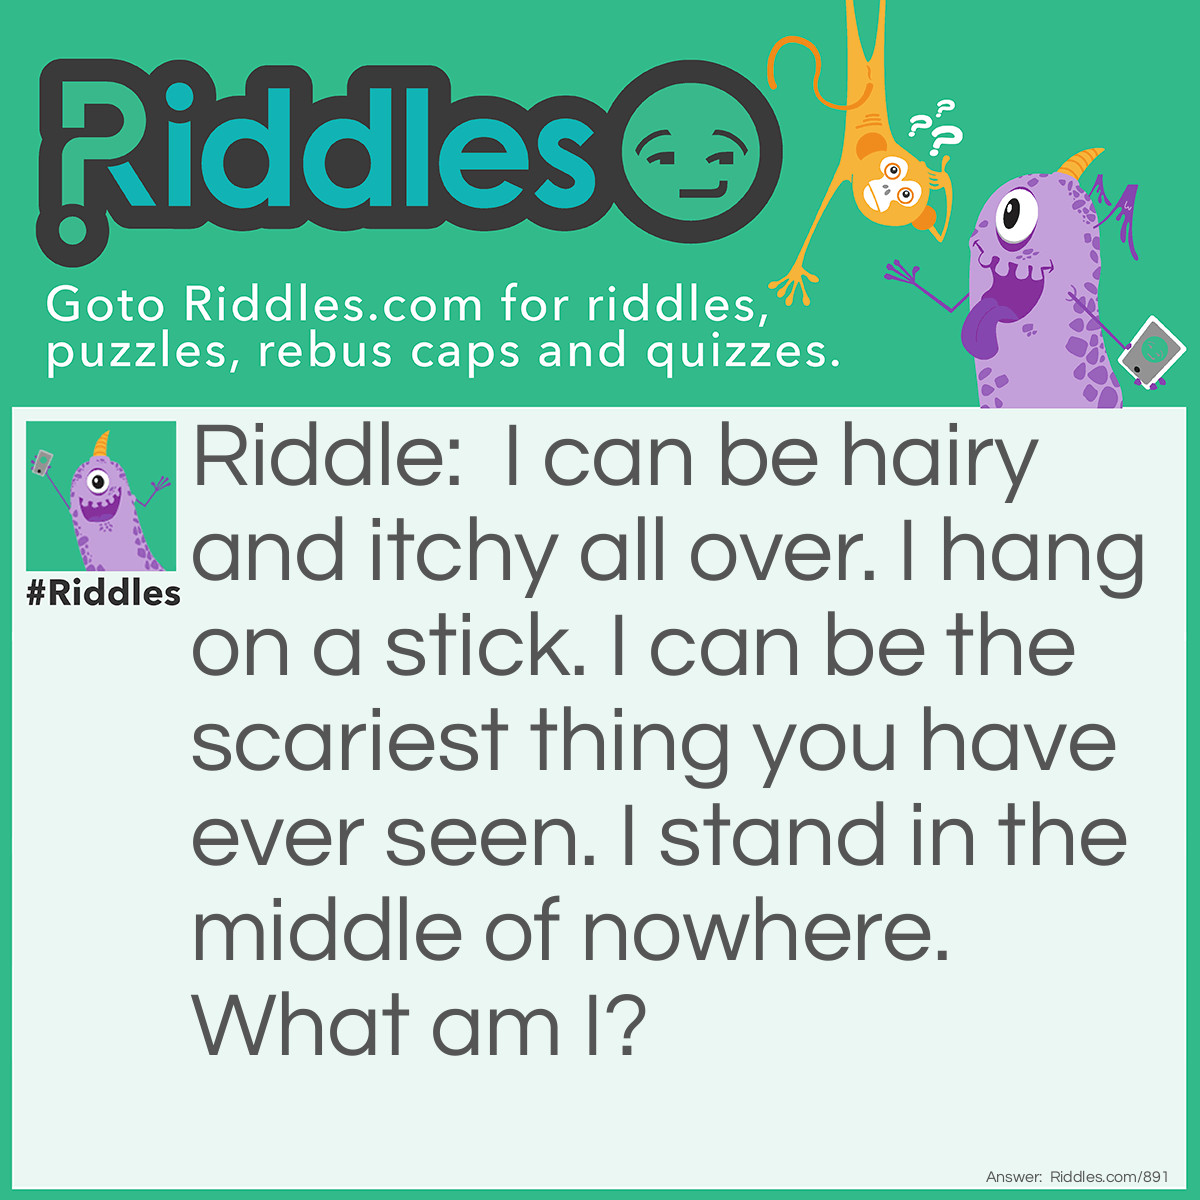 Riddle: I can be hairy and itchy all over. I hang on a stick. I can be the scariest thing you have ever seen. I stand in the middle of nowhere. What am I? Answer: A scarecrow!